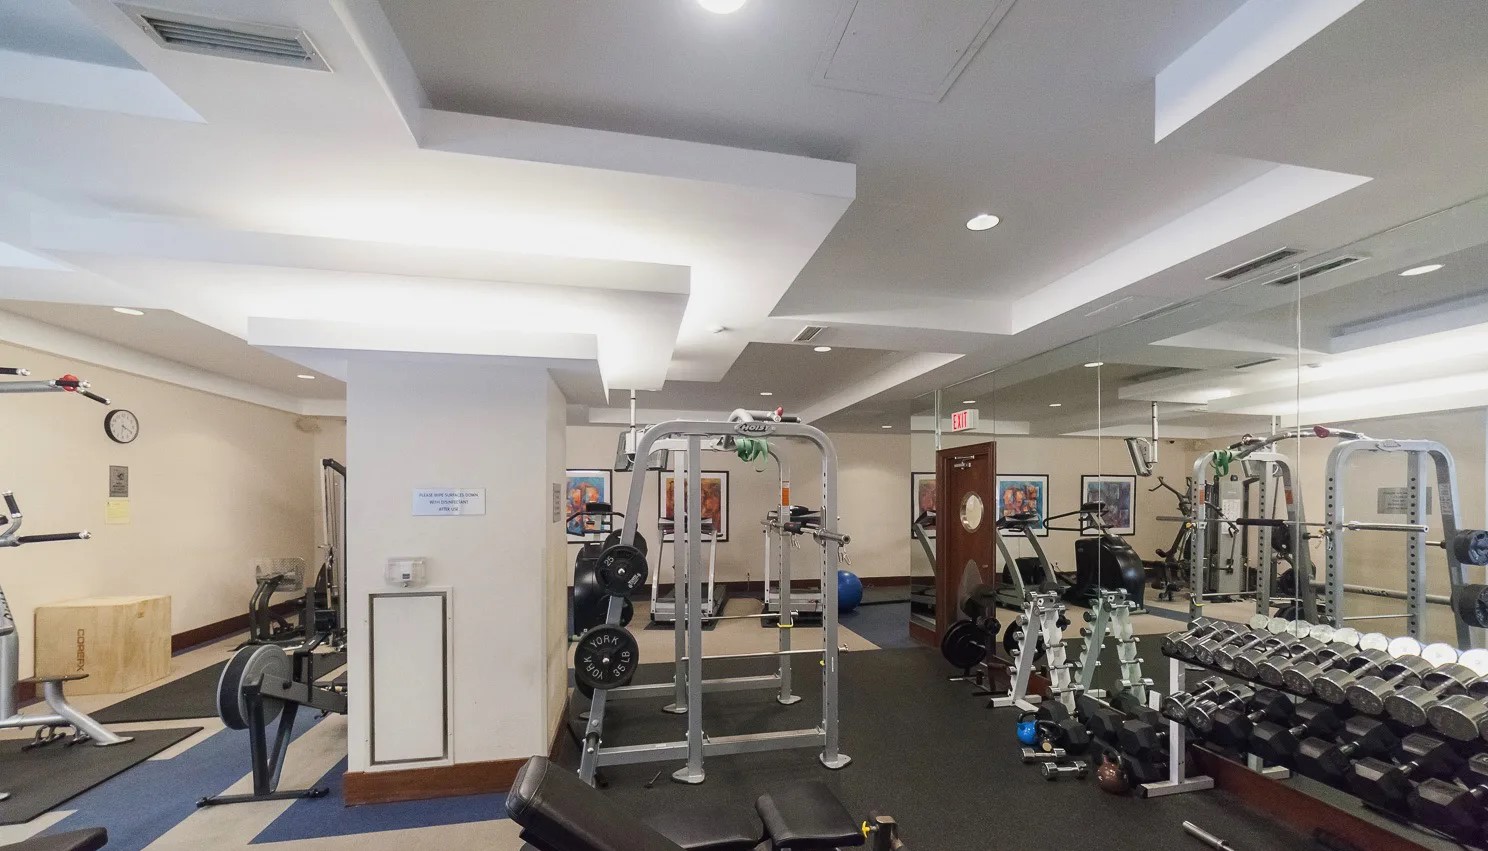 Qwest Condos gym with weights, dumbbells and other exercise equipment.